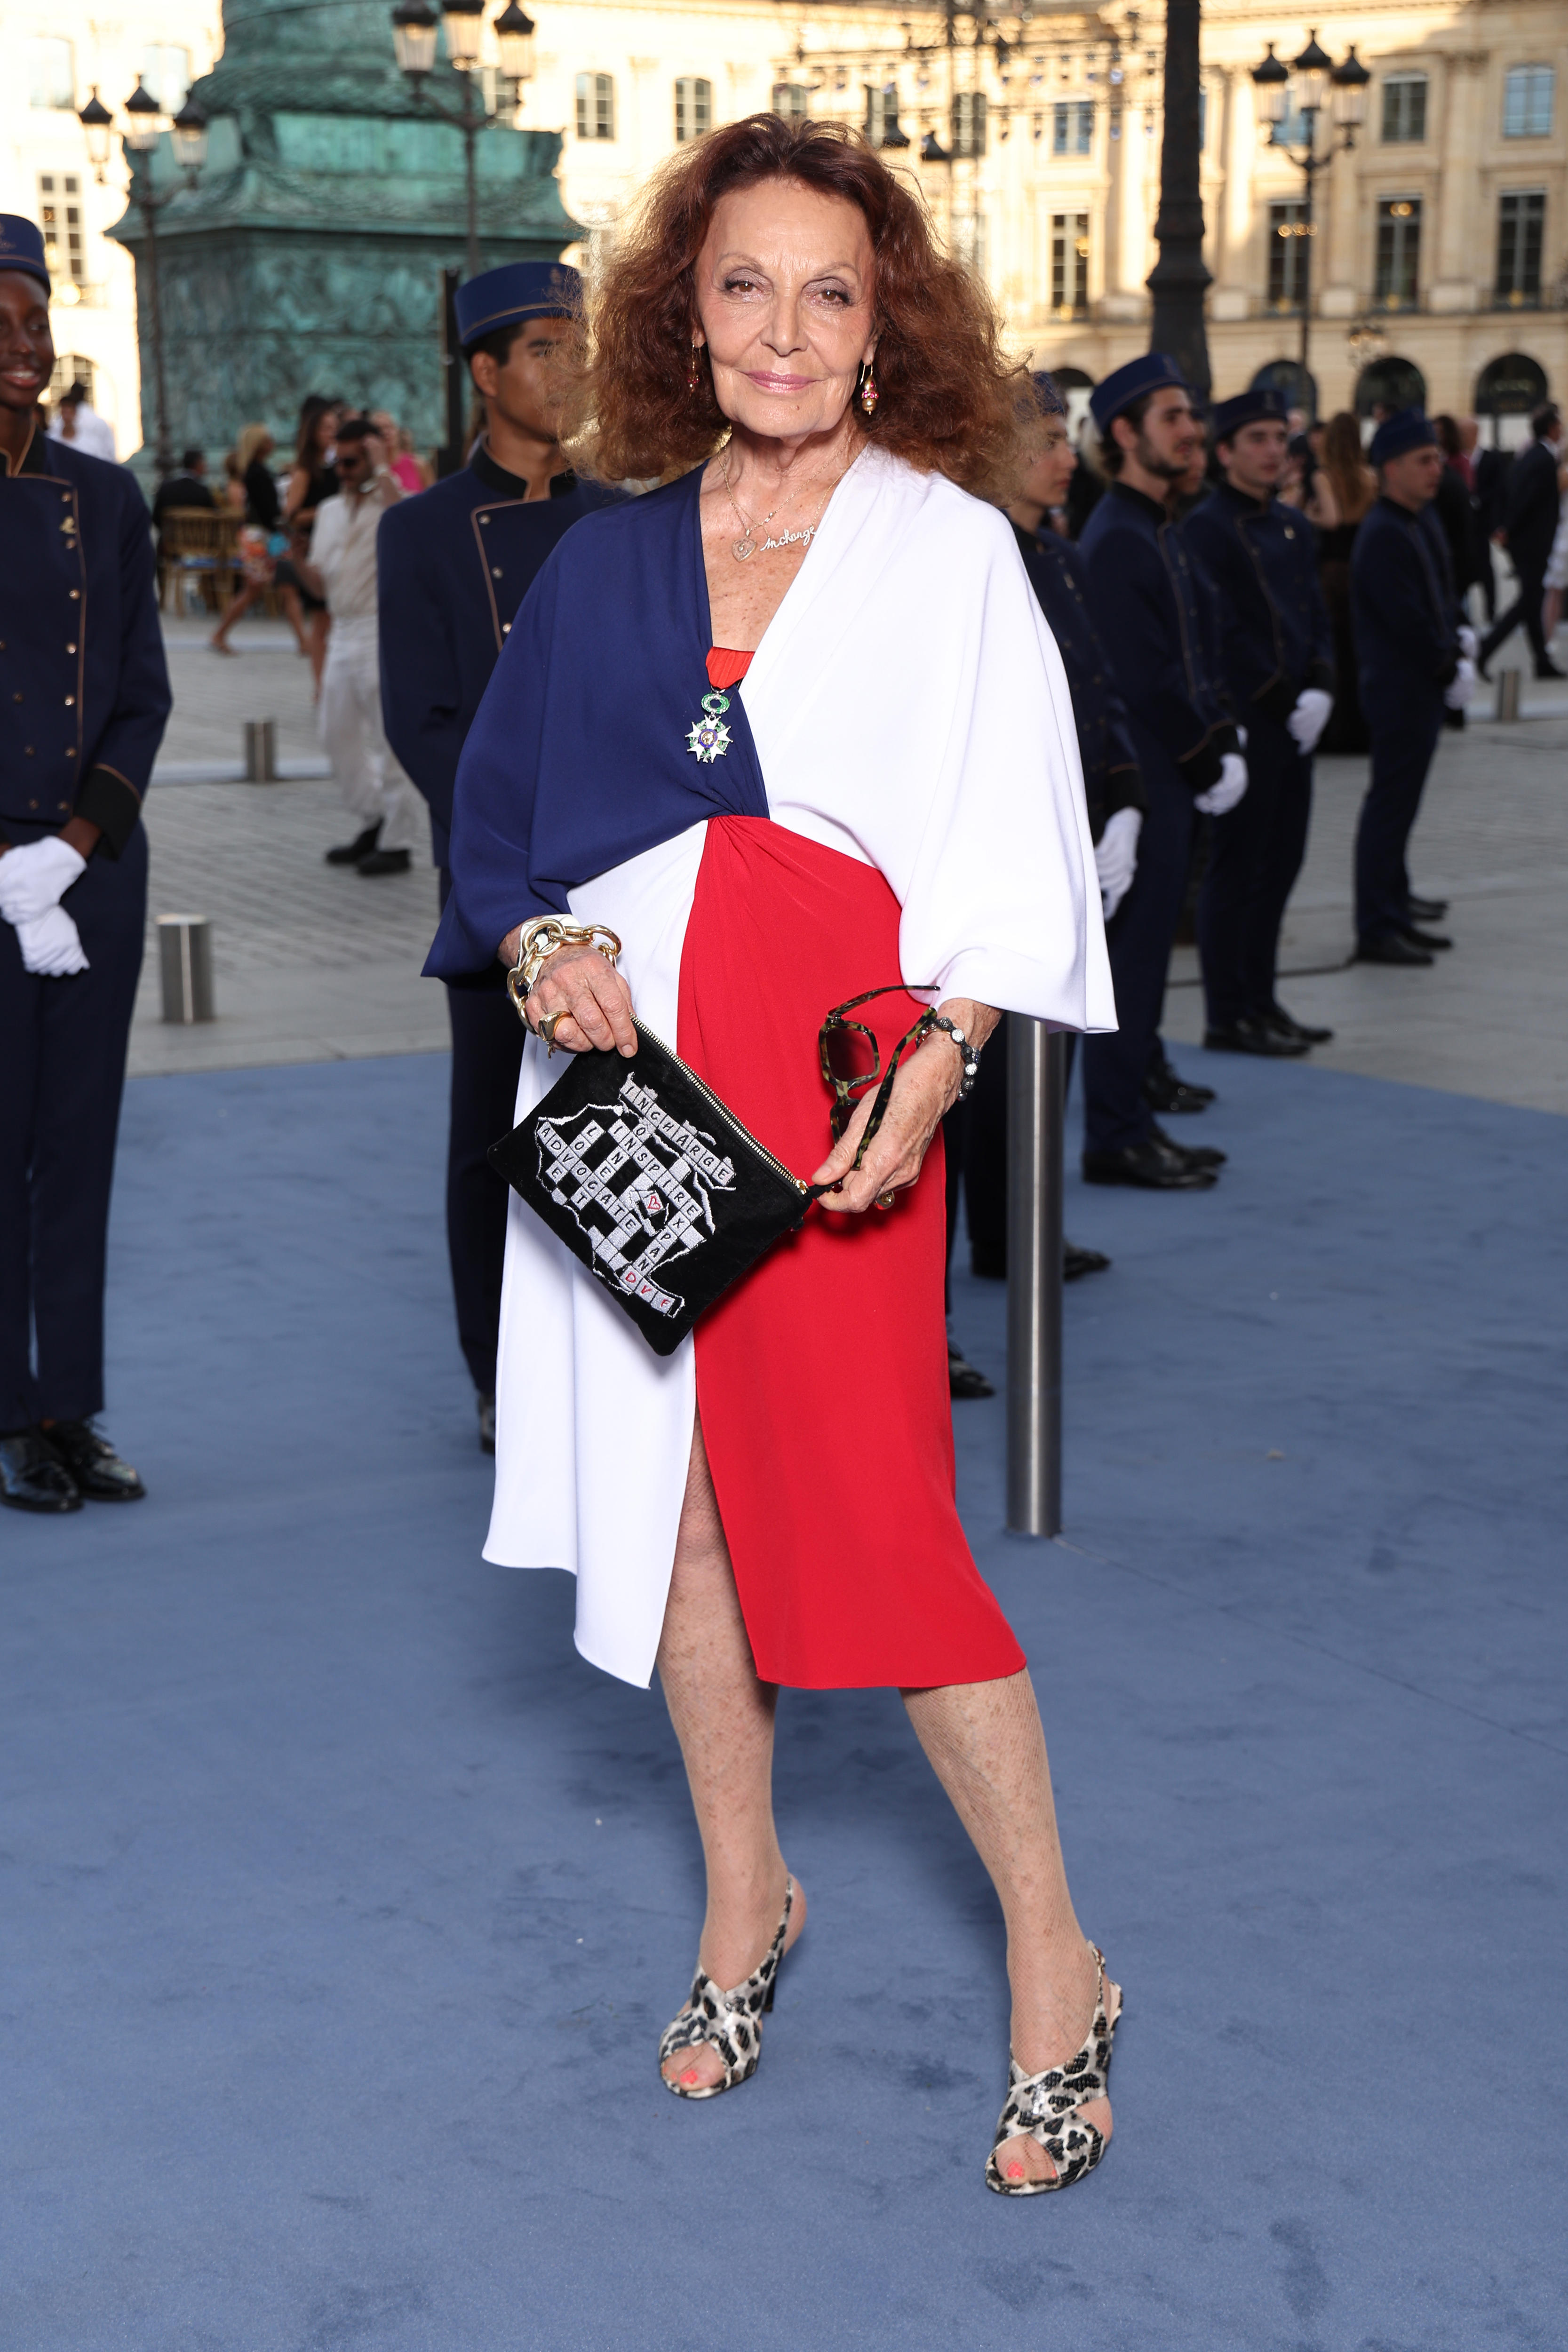 Diane von Furstenberg wears a red, white and blue dress, the colours of the French flag.